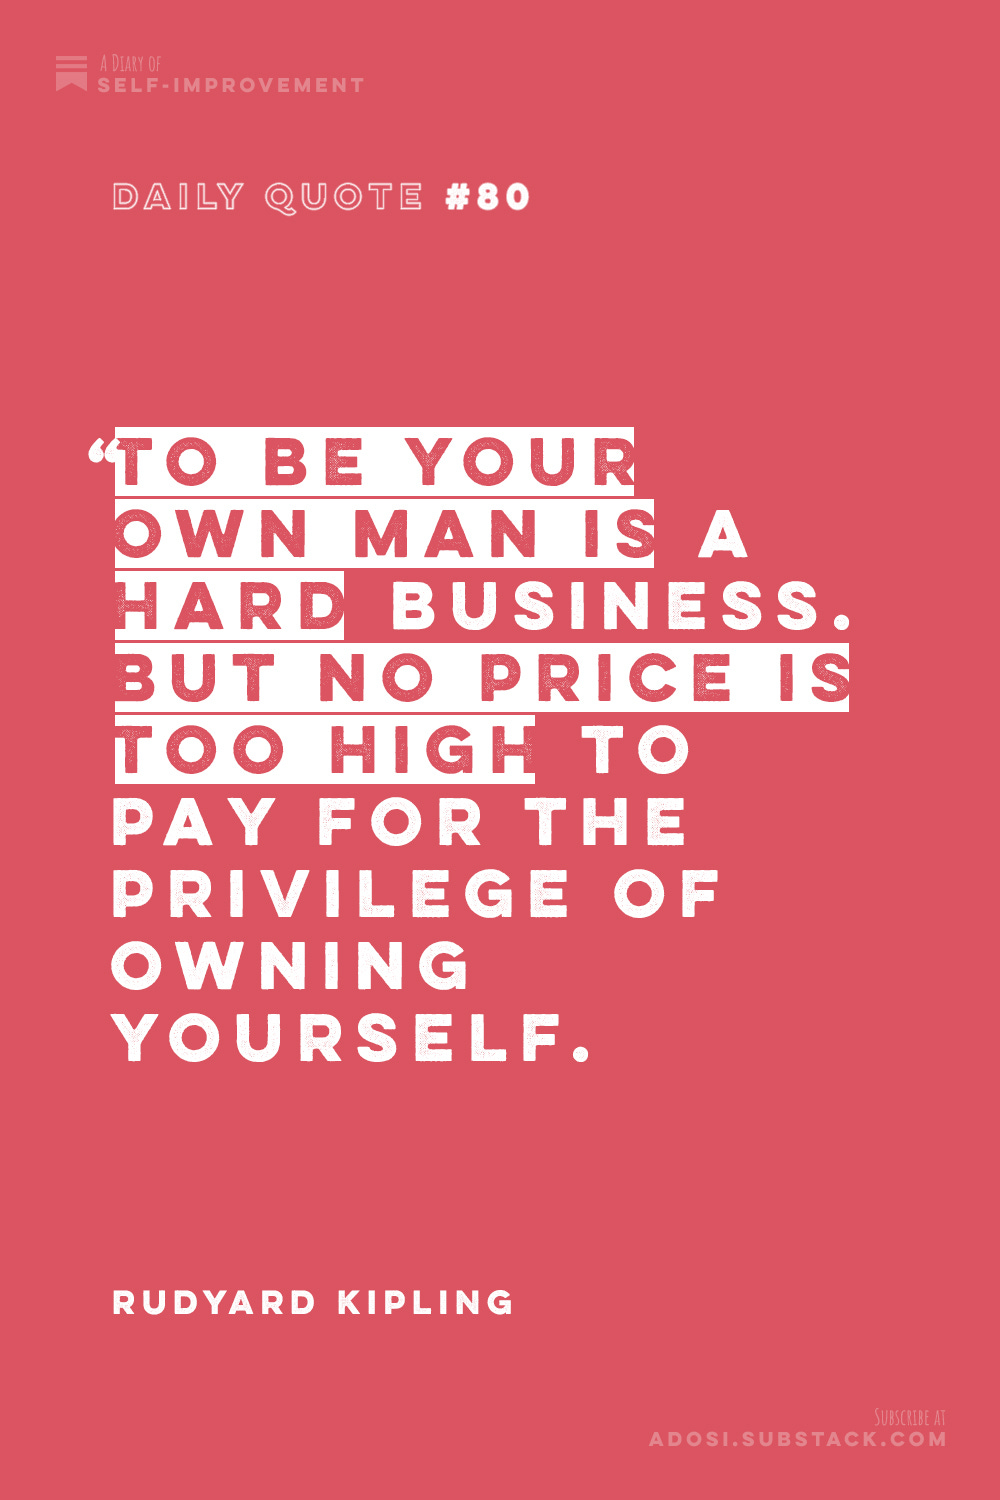 Daily Quote #80: "To be your own man is a hard business. But no price is too high to pay for the privilege of owning yourself.” Rudyard Kipling